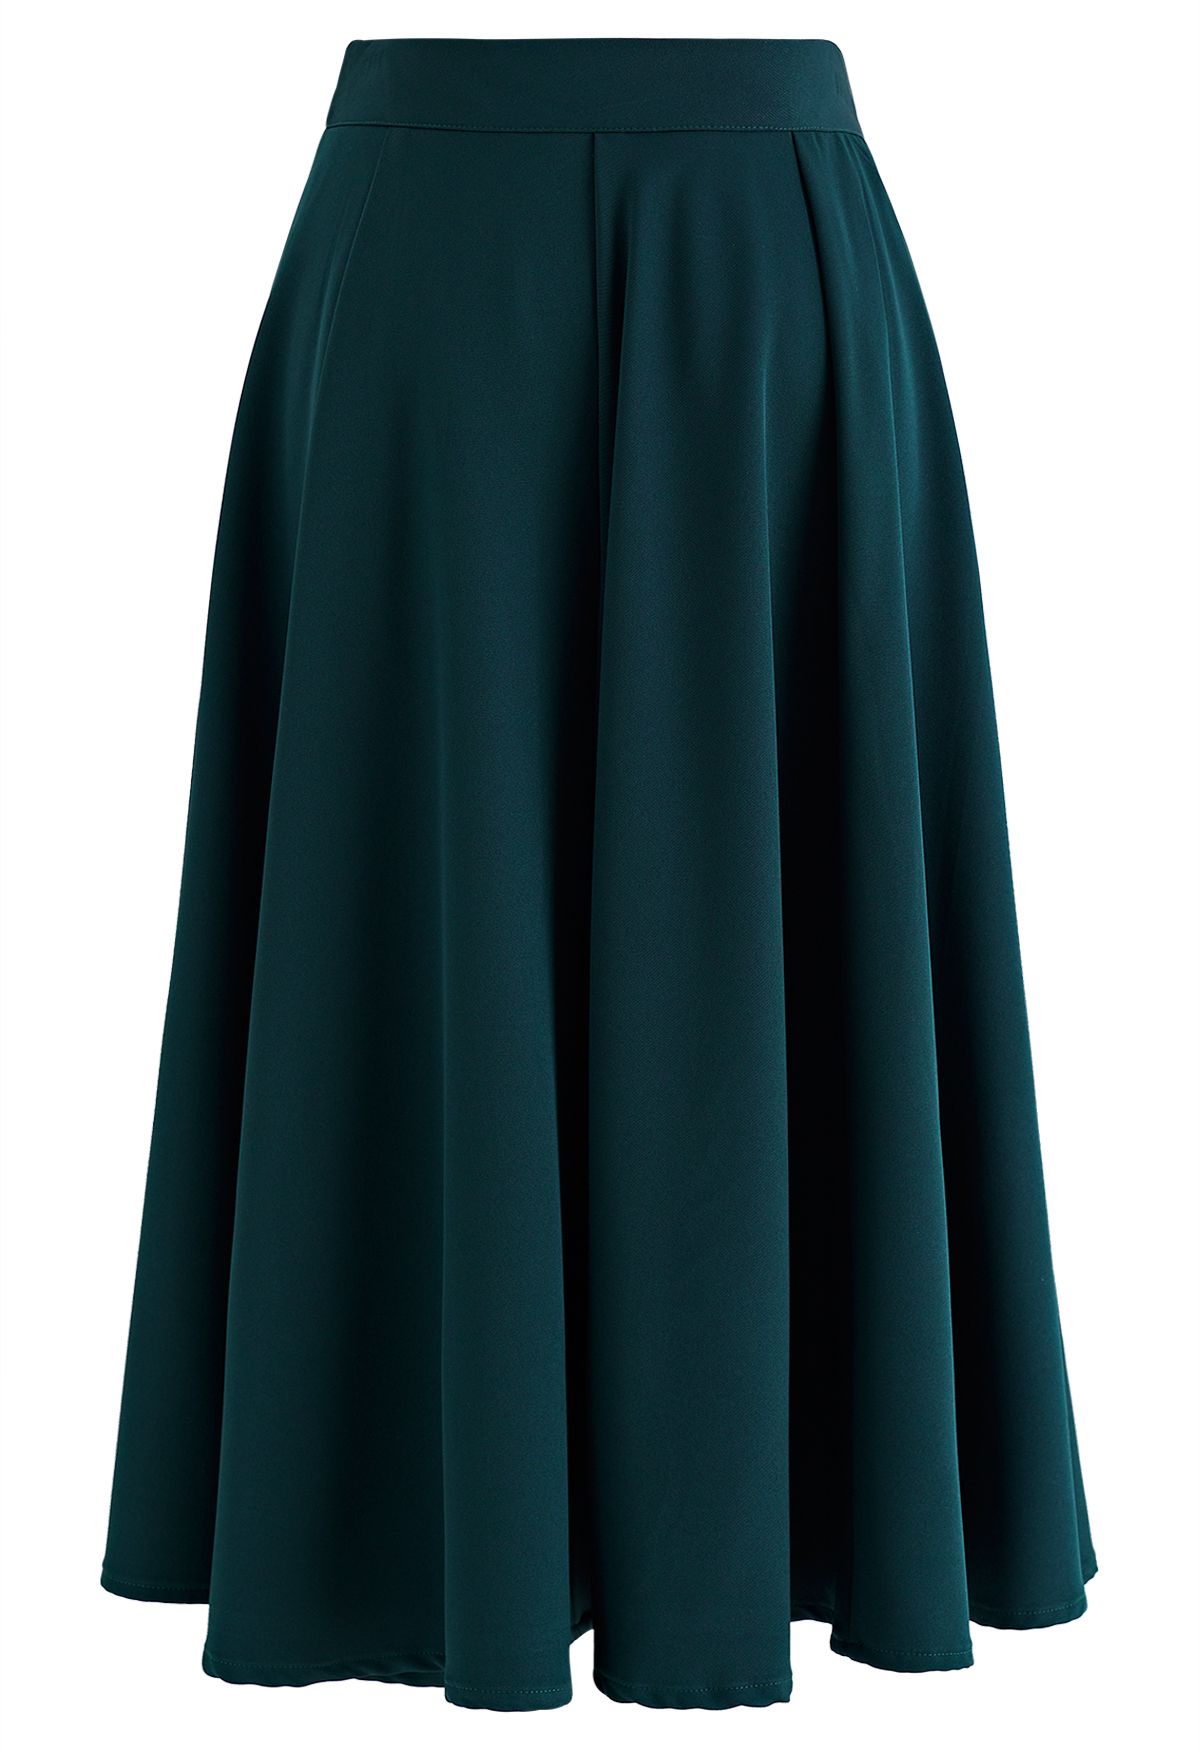 Buttoned Pleated A-Line Skirt in Dark Green - Retro, Indie and Unique ...